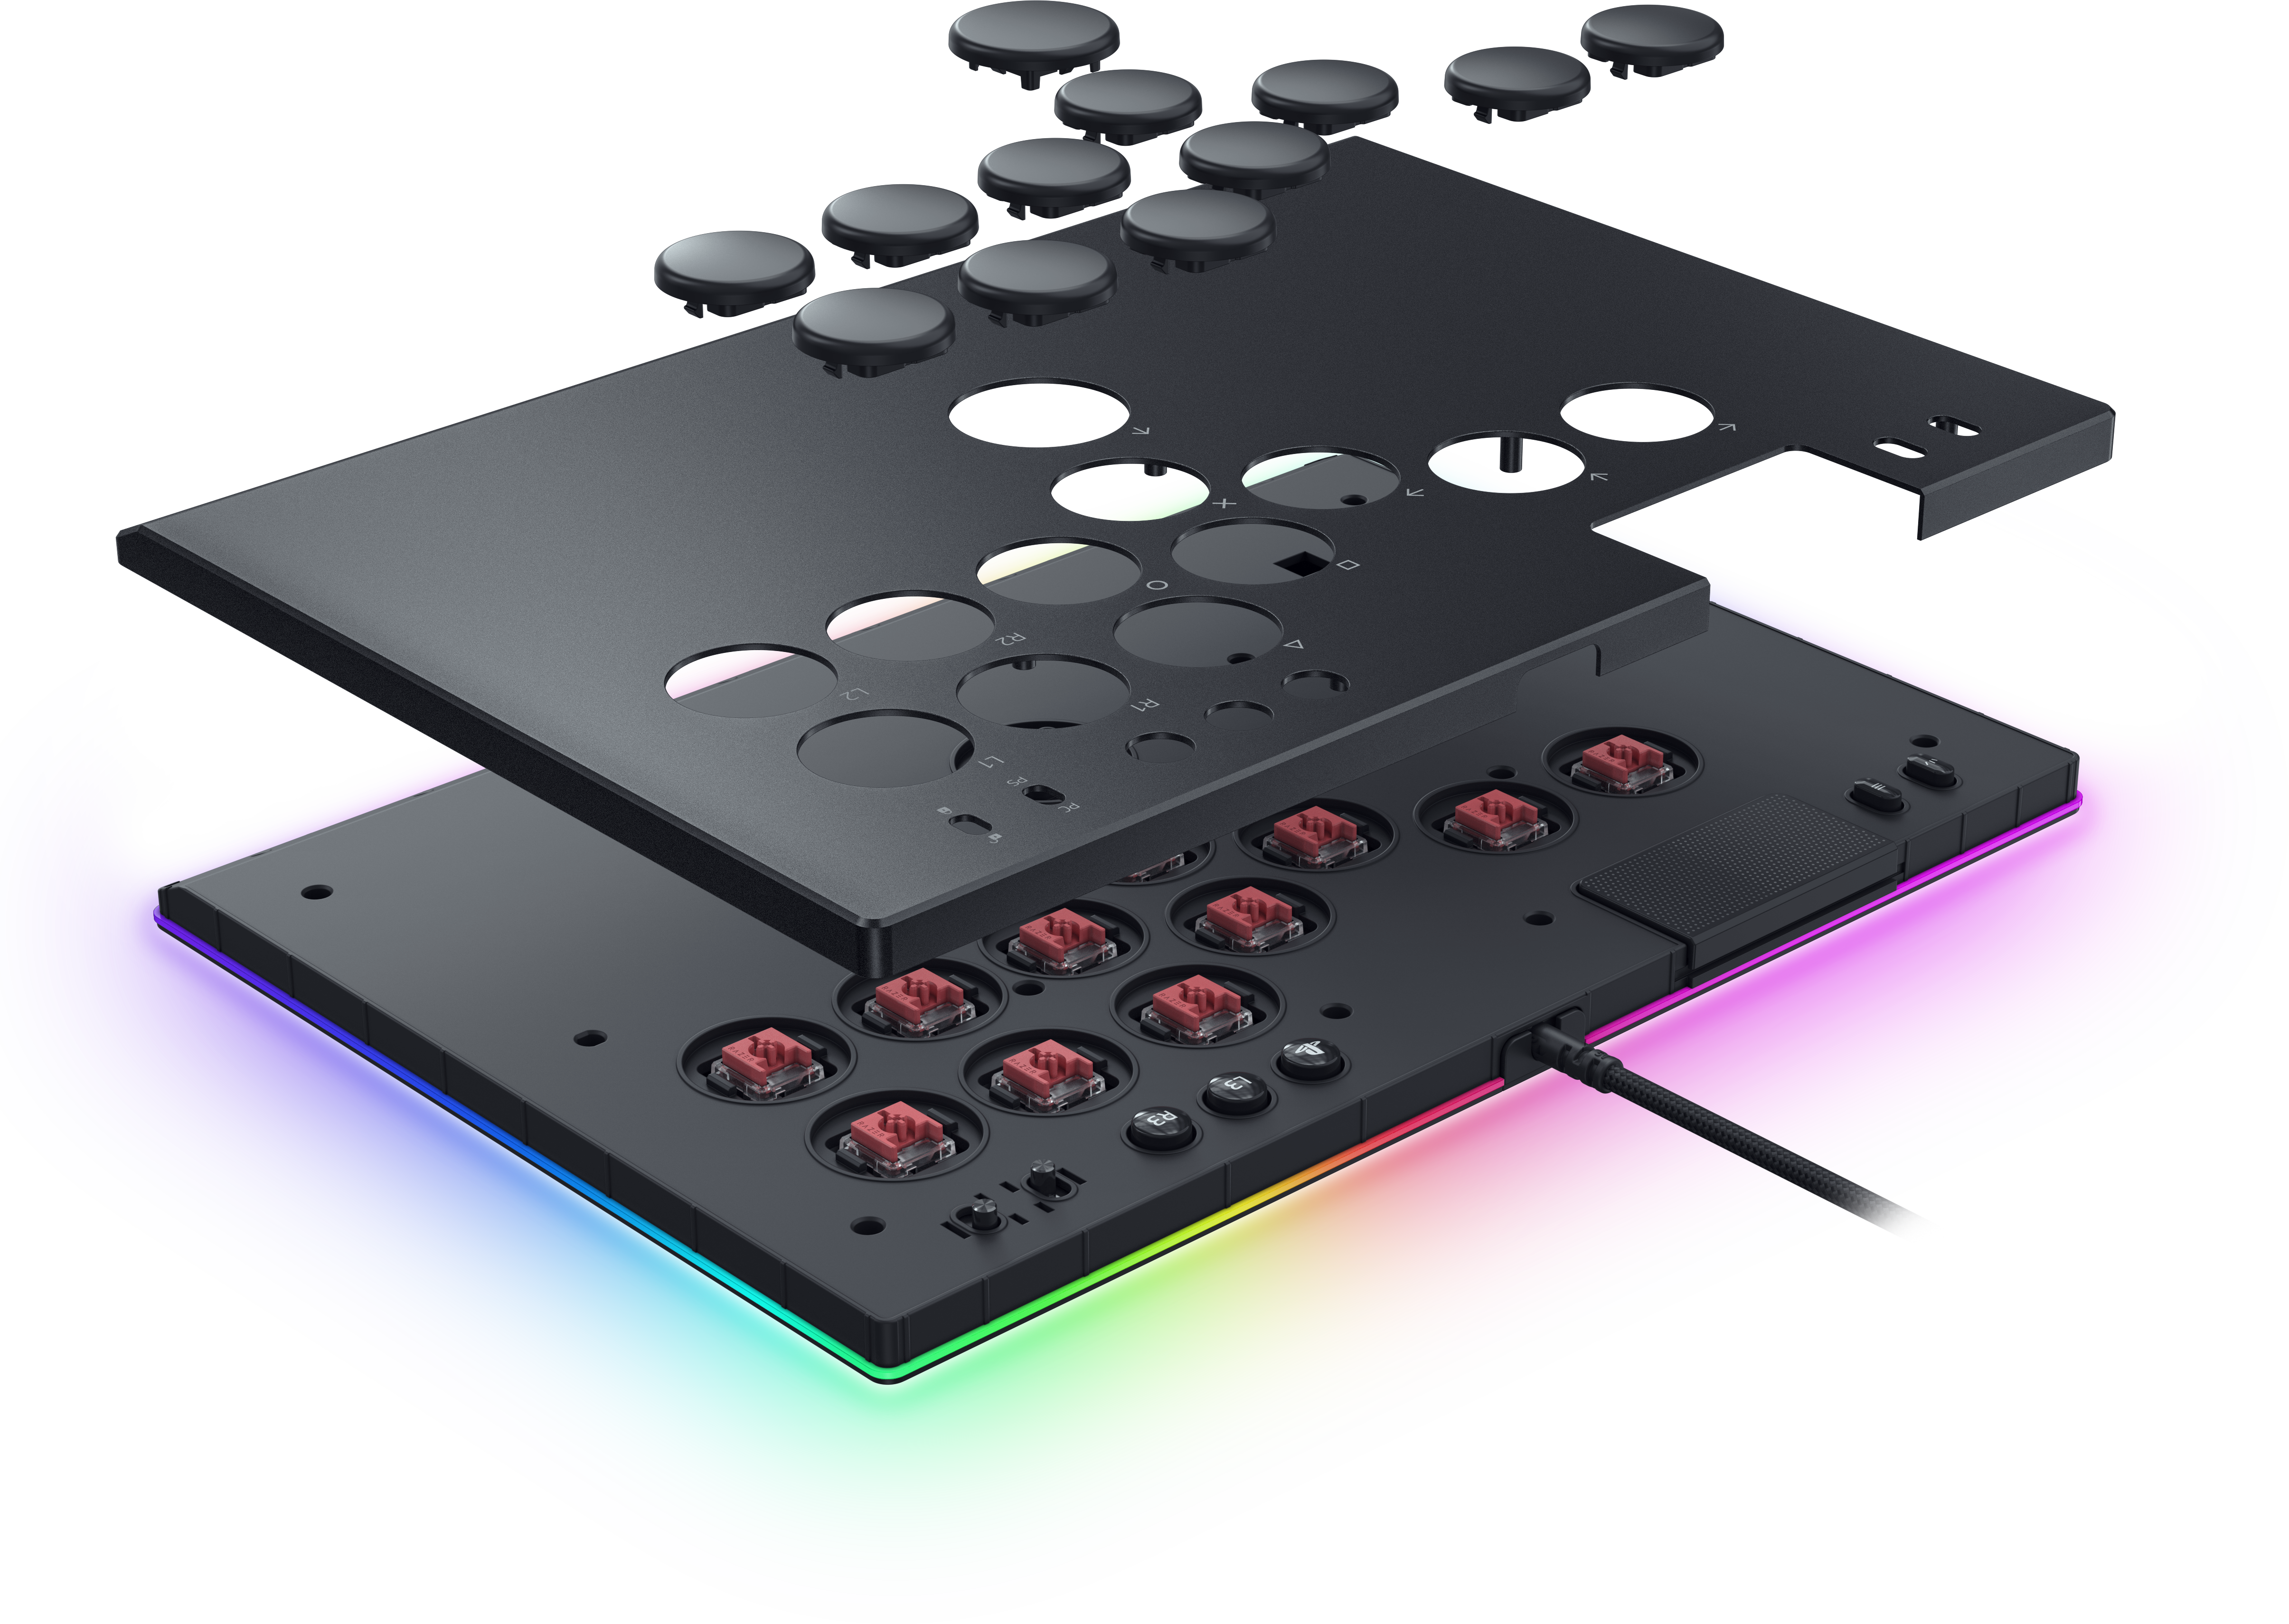 New Razer arcade controller now available for pre-order from $300